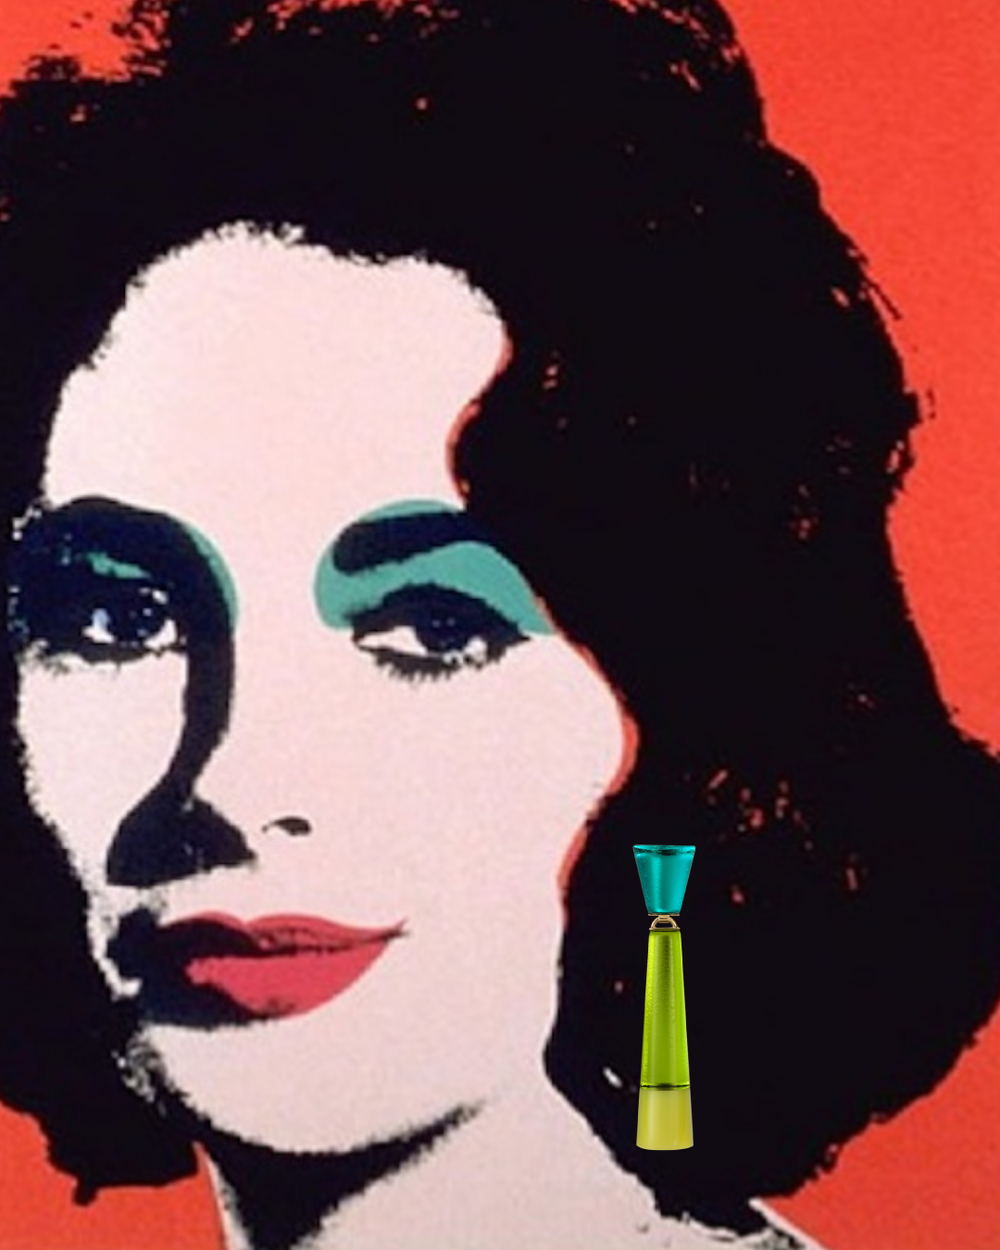 Art-time-travelling-with-Warhol-1964.png